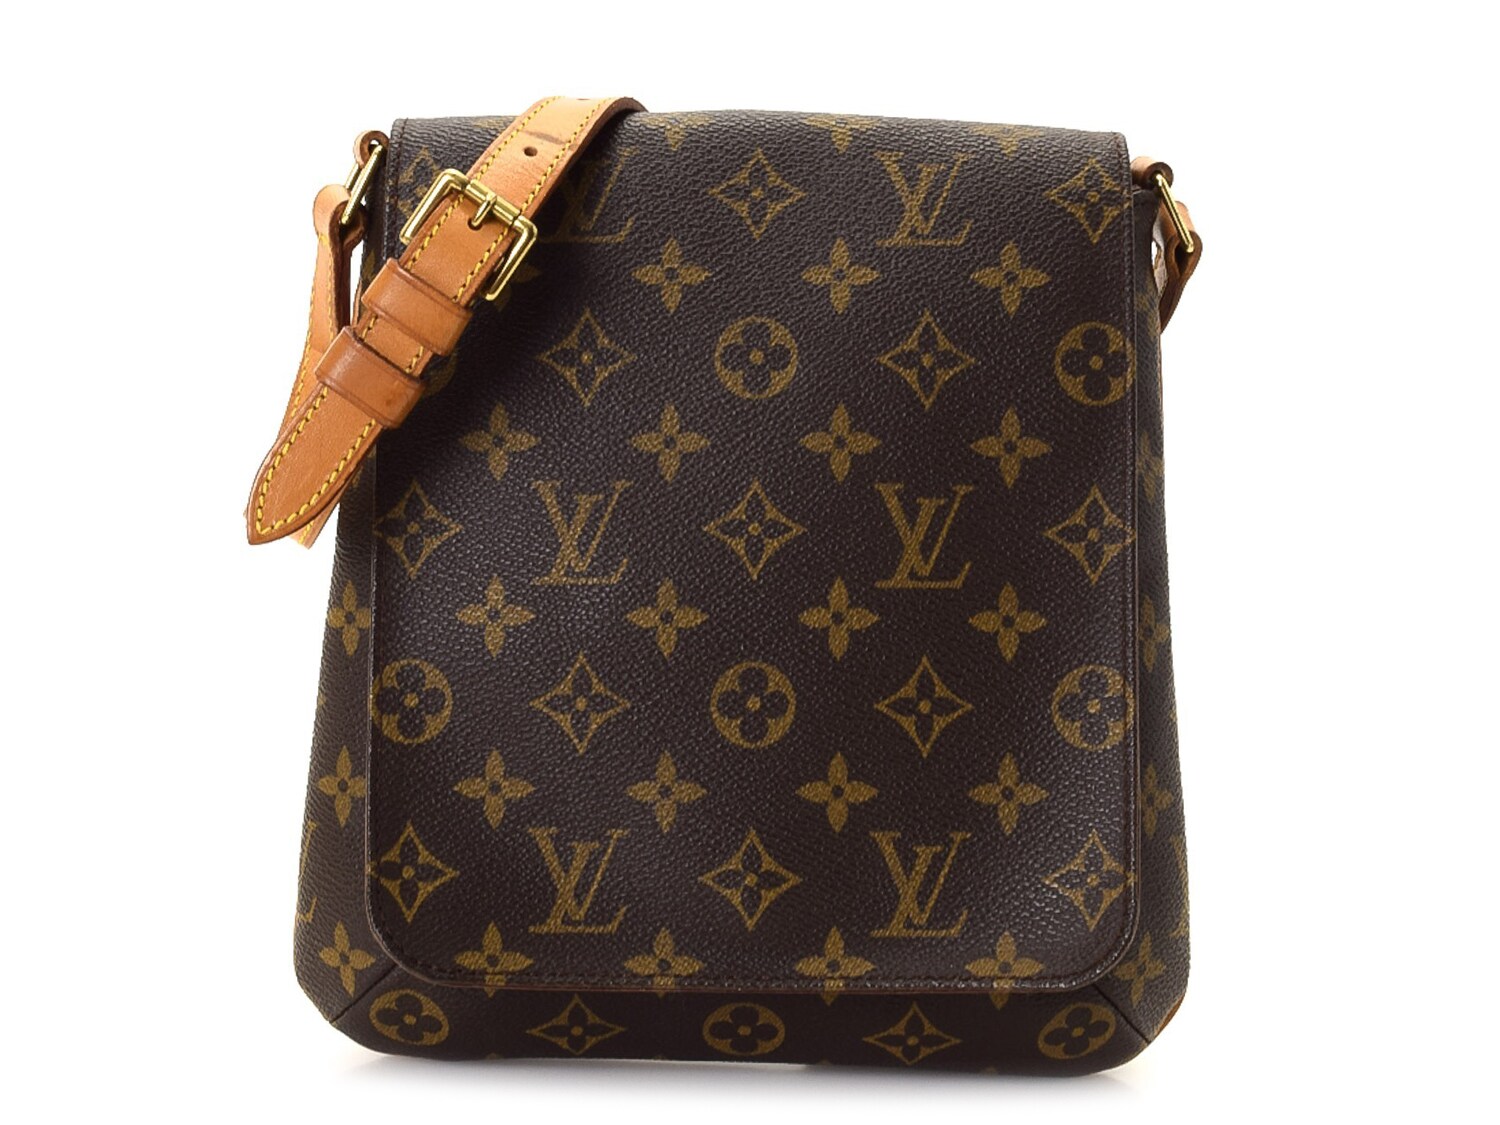 Louis Vuitton - Authenticated Musette Handbag - Synthetic Brown for Women, Very Good Condition